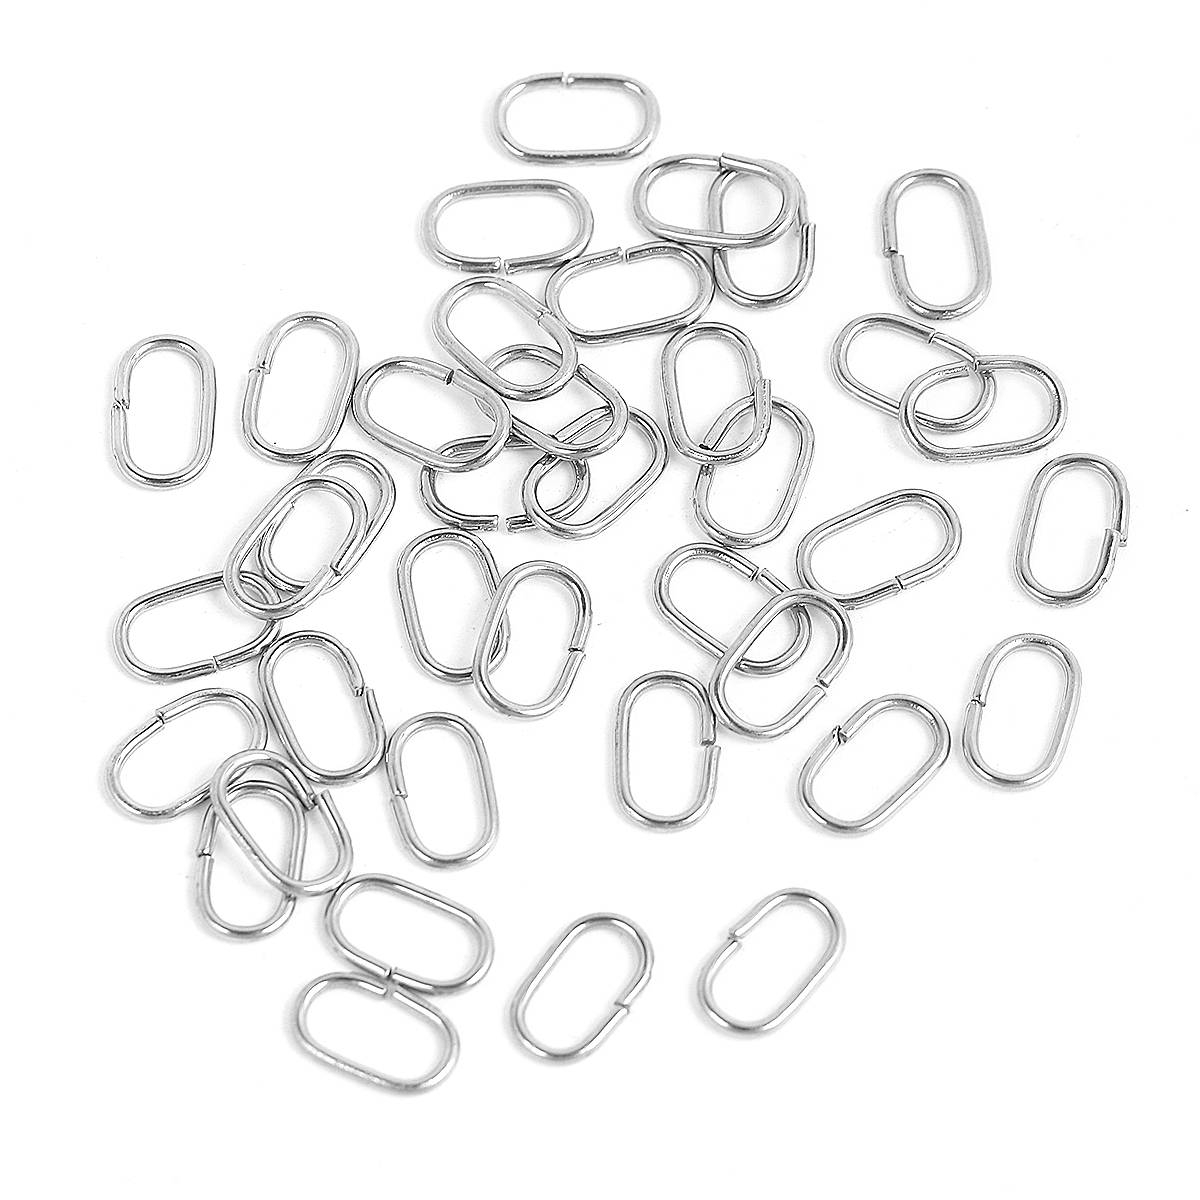 Stainless steel oval jump rings 7, 8 or 10mm